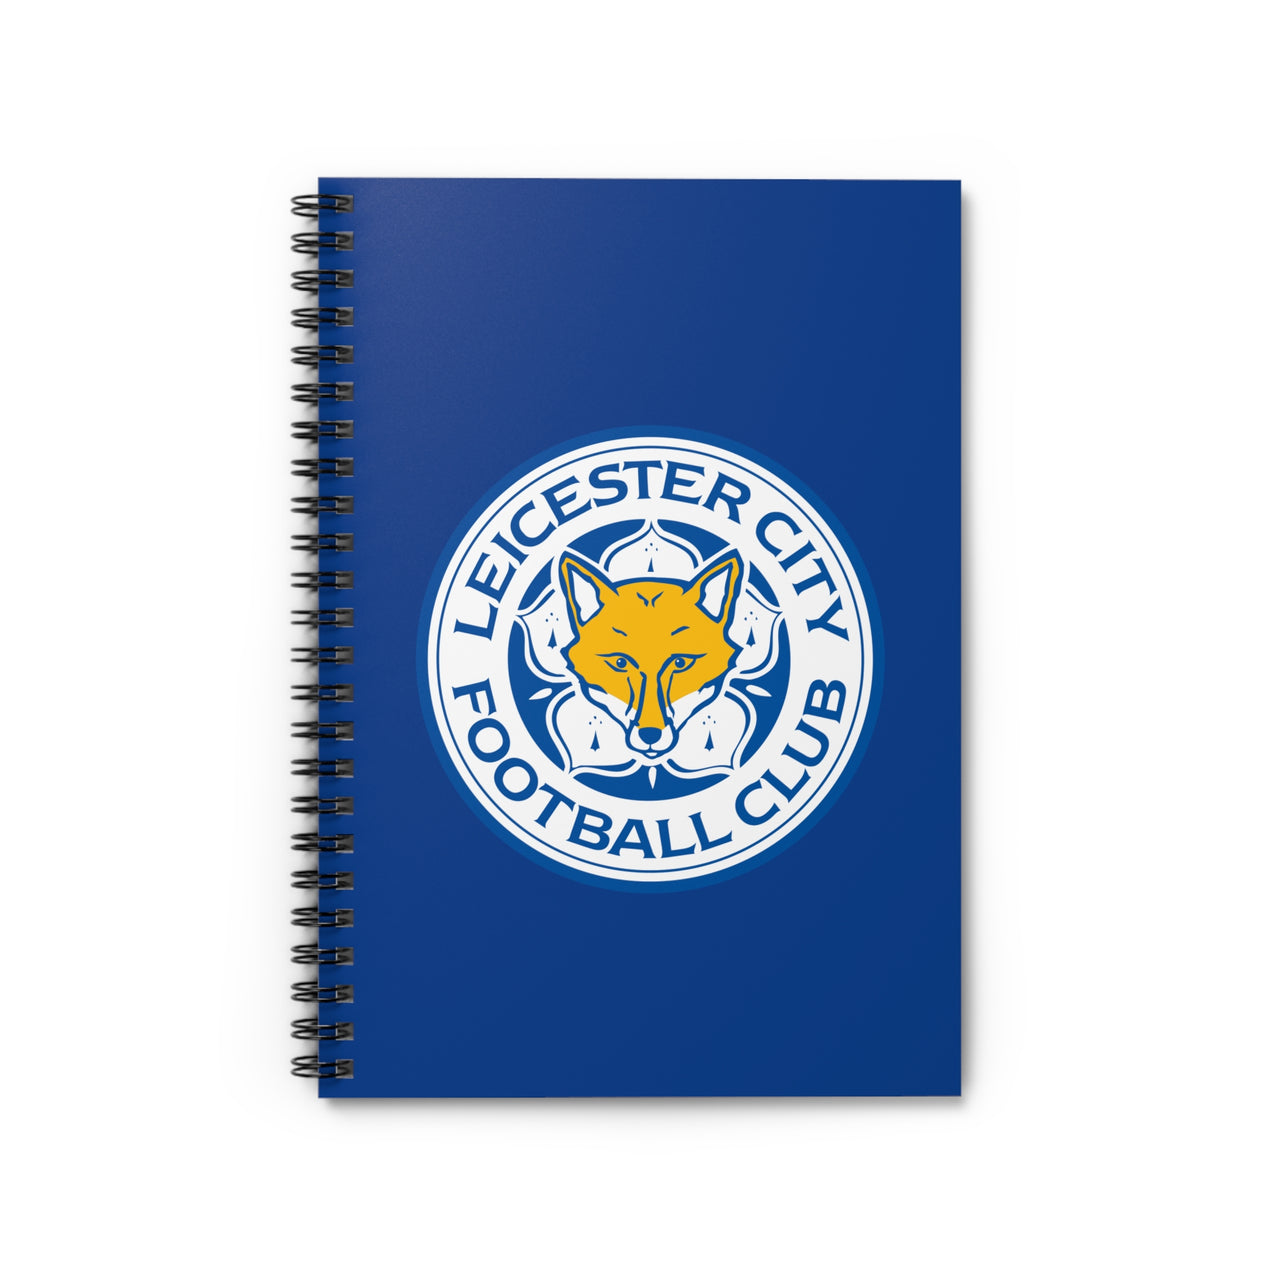 Leicester City Spiral Notebook - Ruled Line